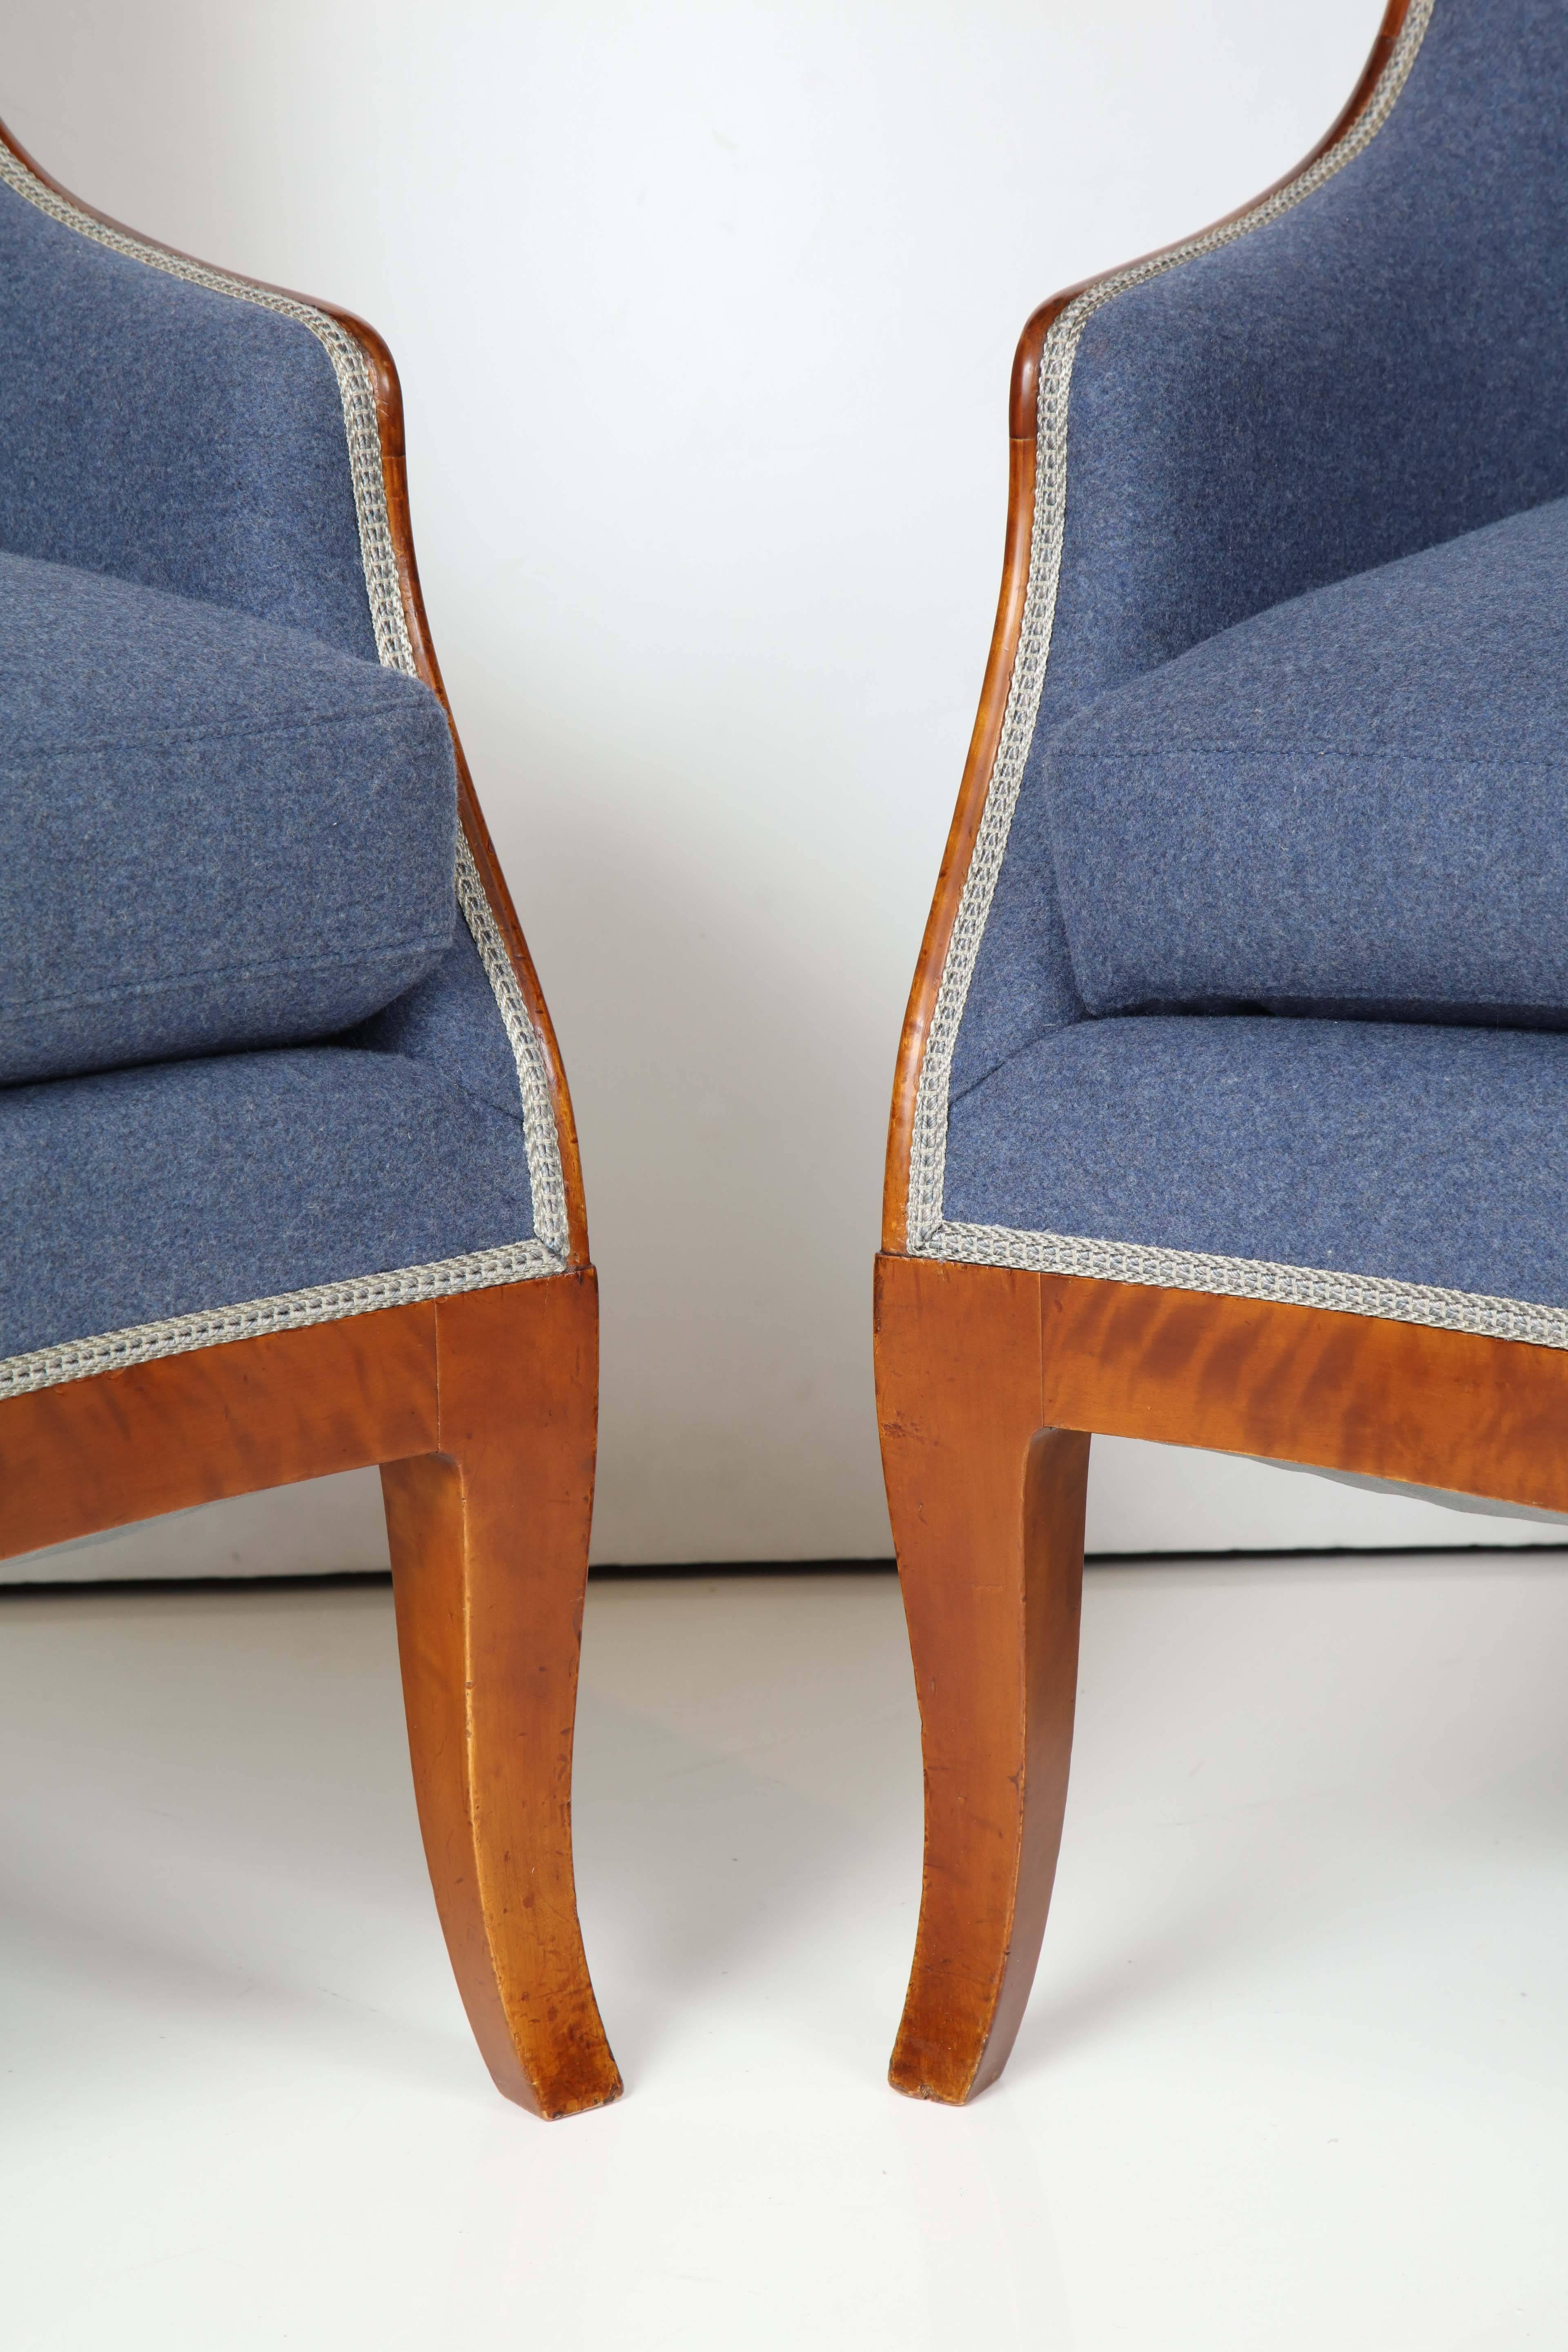 A pair of Swedish Grace birchwood highback armchairs, by Nordiska Kompaniet, Original design, circa 1918. This pair stamped Ca. 1919. Graceful curved backs and outcurve legs. Restored and reupholstered in grey and blue wool.